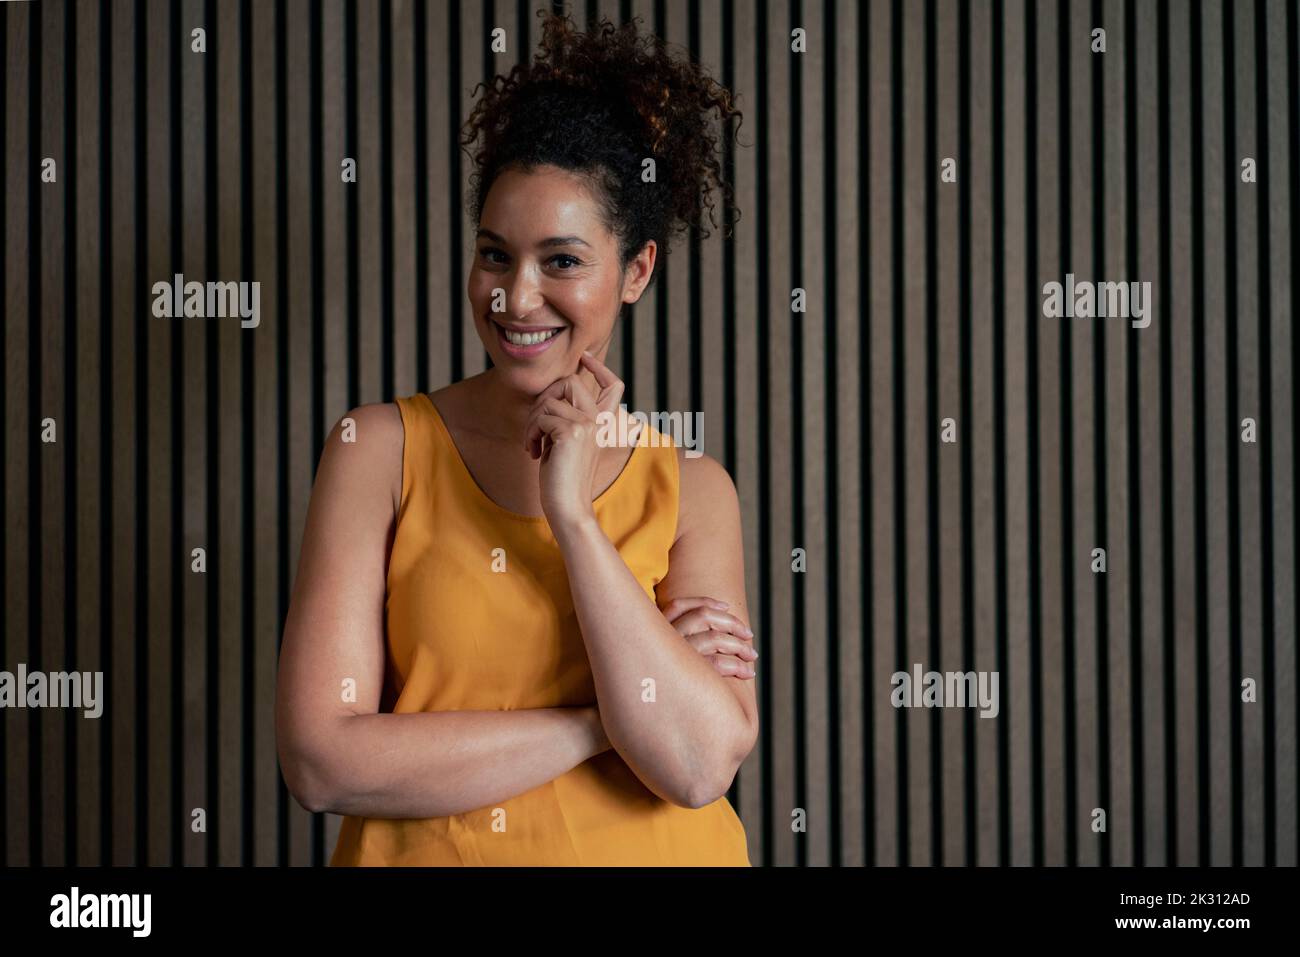 Smiling woman with hand on chin in front of brown striped wall Stock Photo